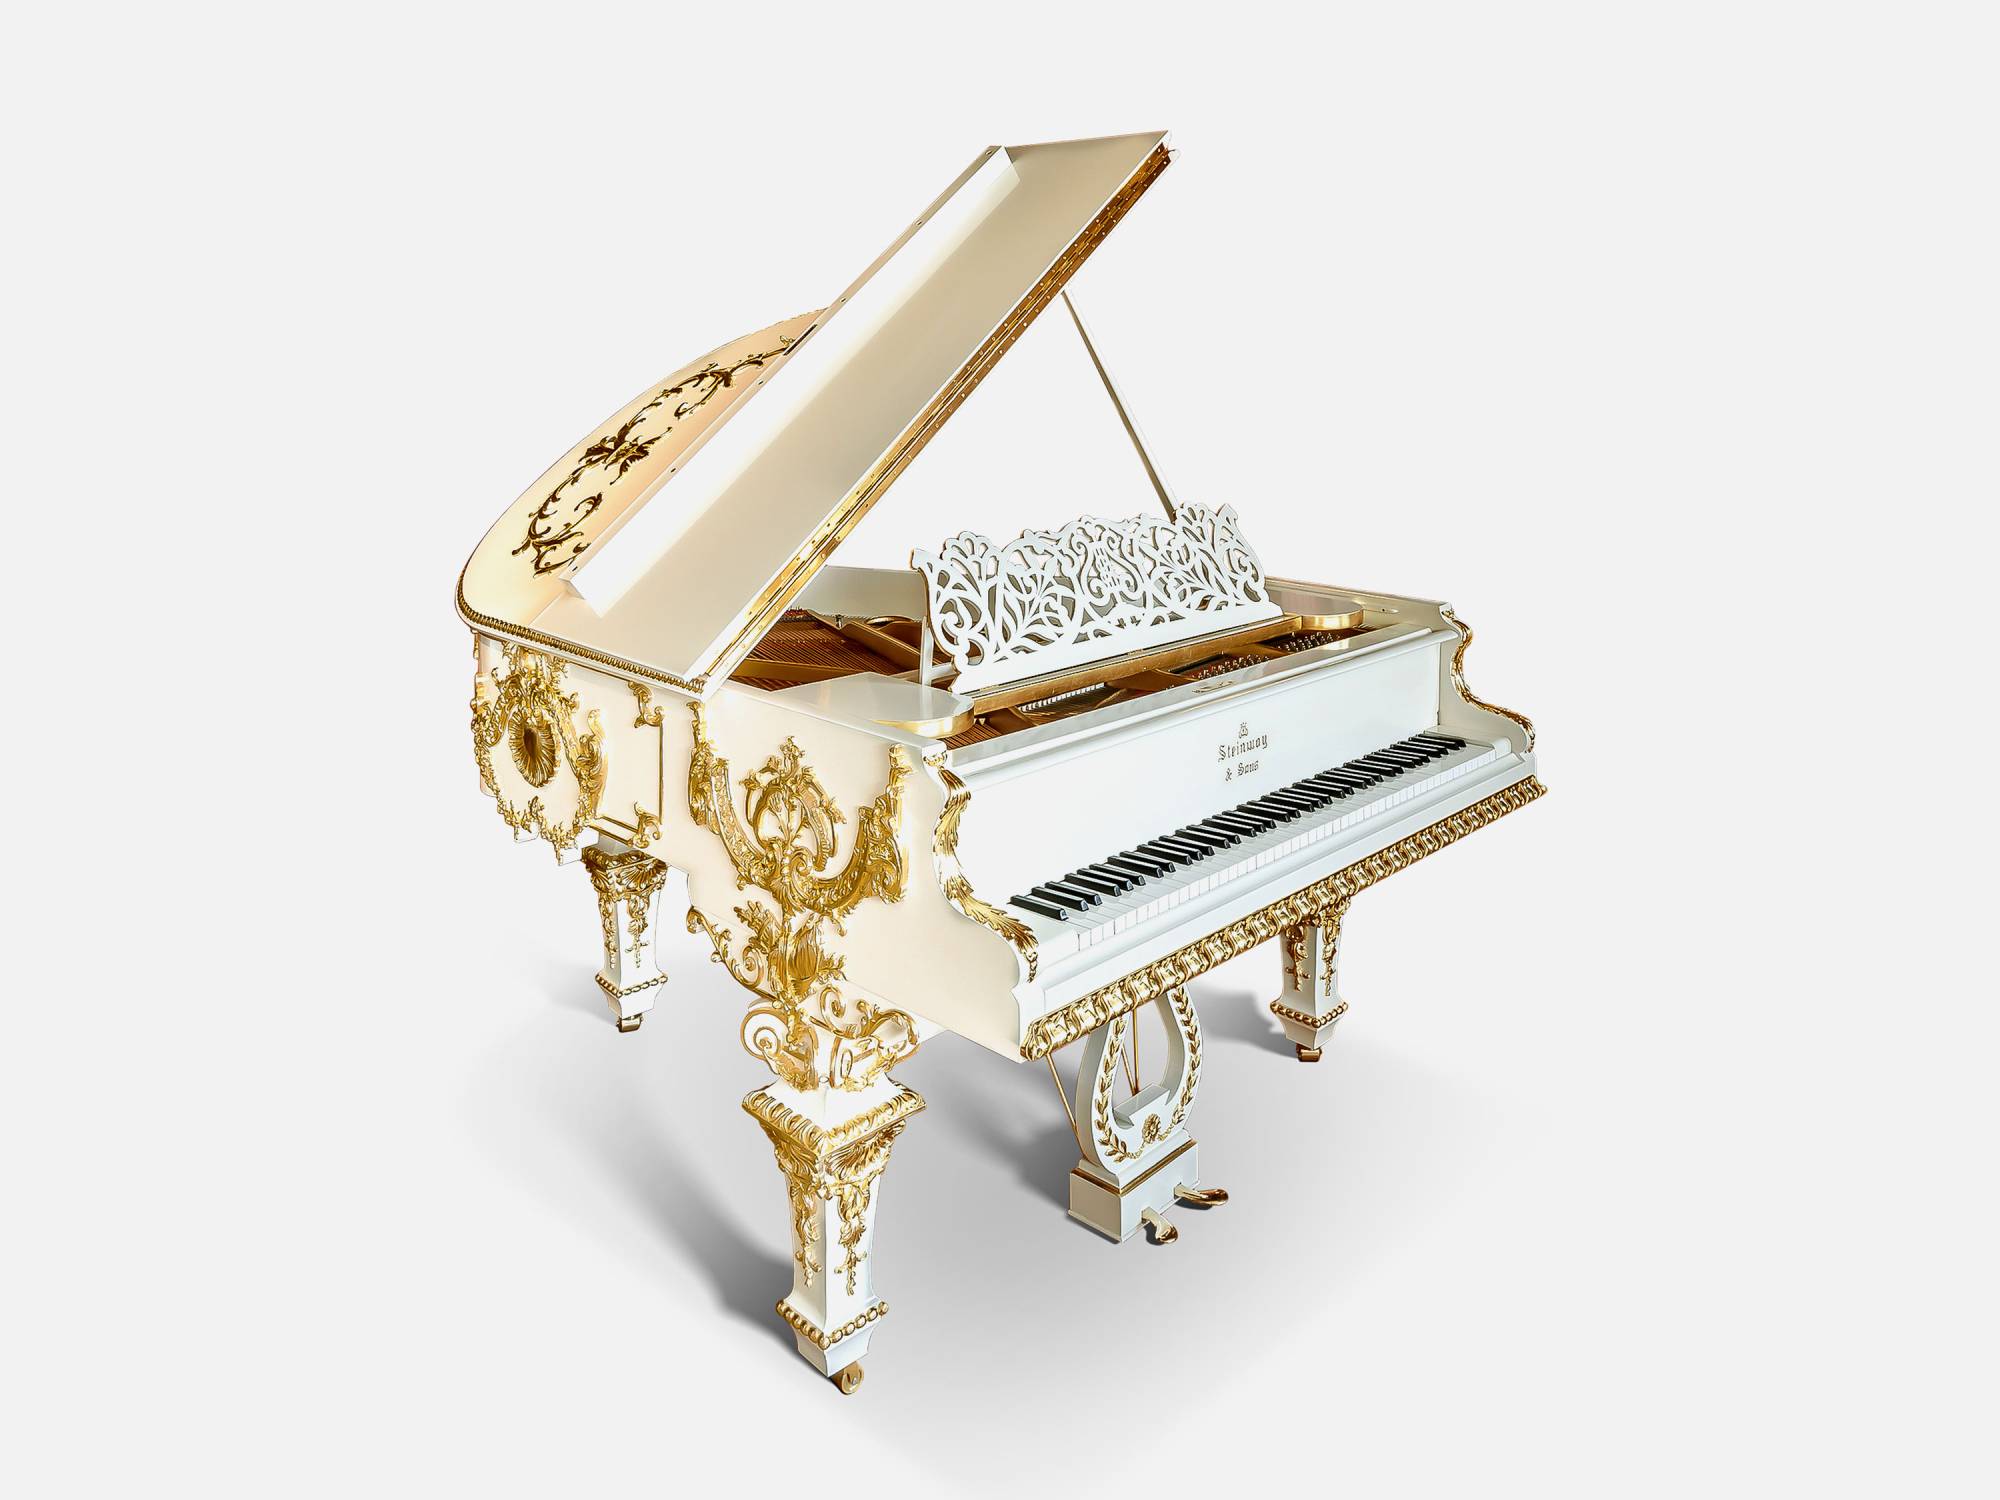 ART. 2709 – The elegance of luxury classic Pianos made in Italy by C.G. Capelletti.